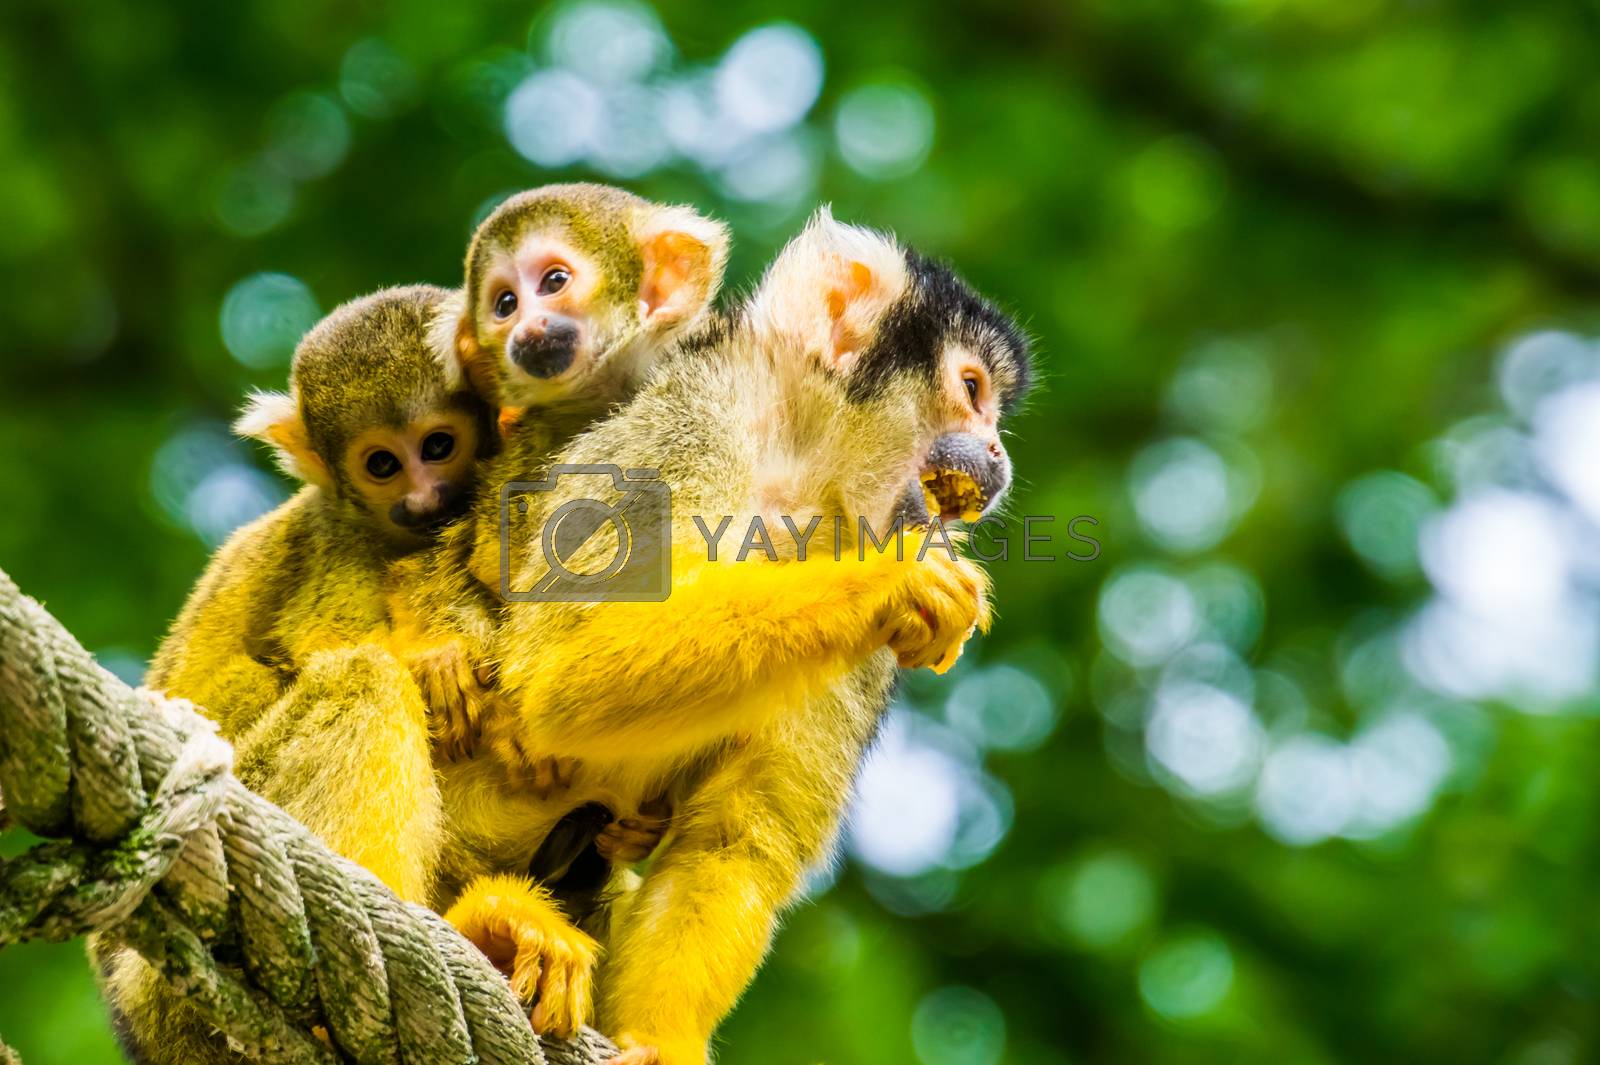 Royalty free image of common squirrel monkey with twin infants on her back, tropical primate specie from the amazon basin of America by charlottebleijenberg